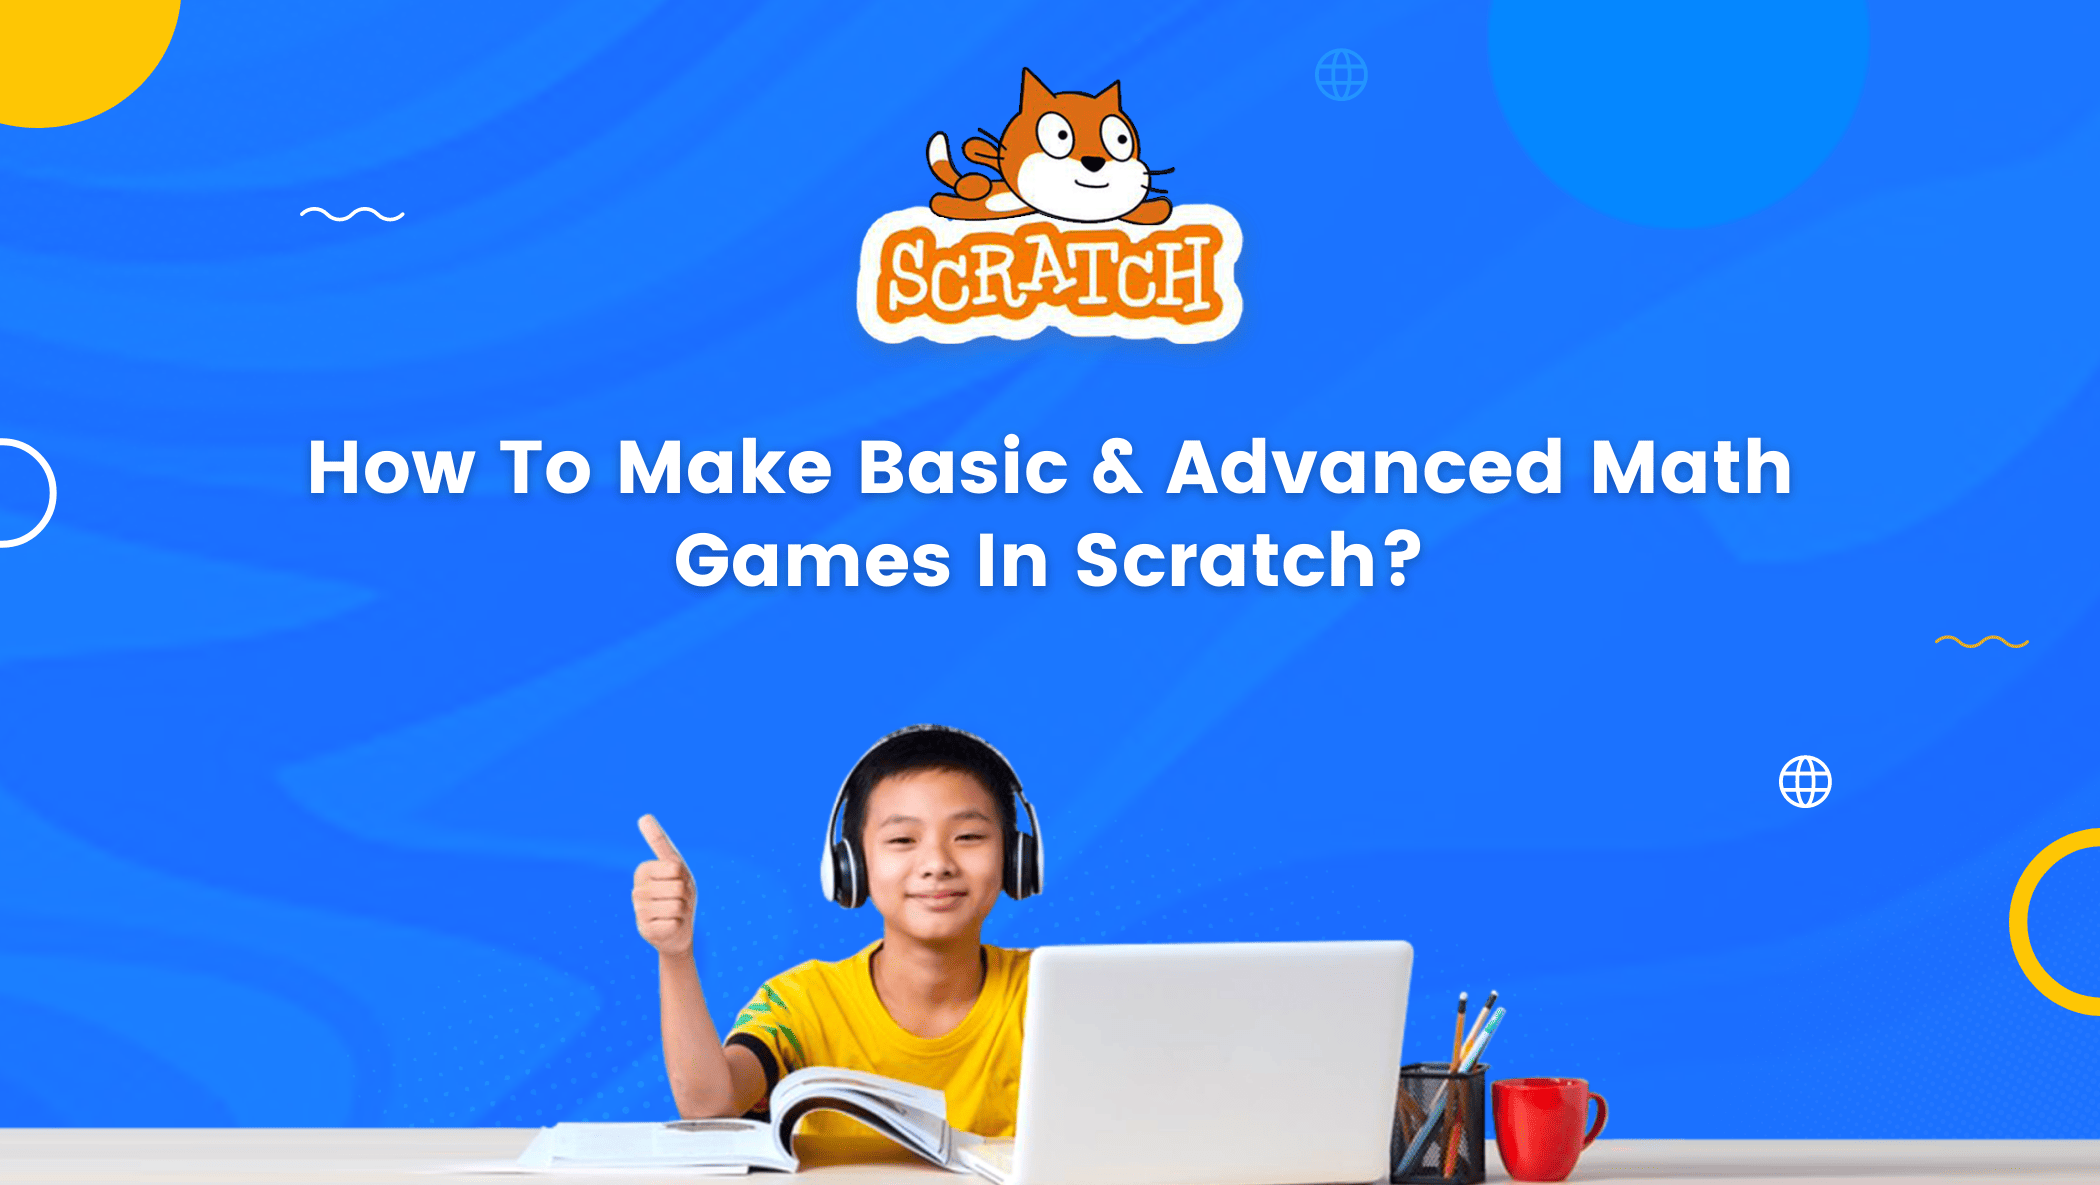 How To Make Basic & Advanced Math Games In Scratch